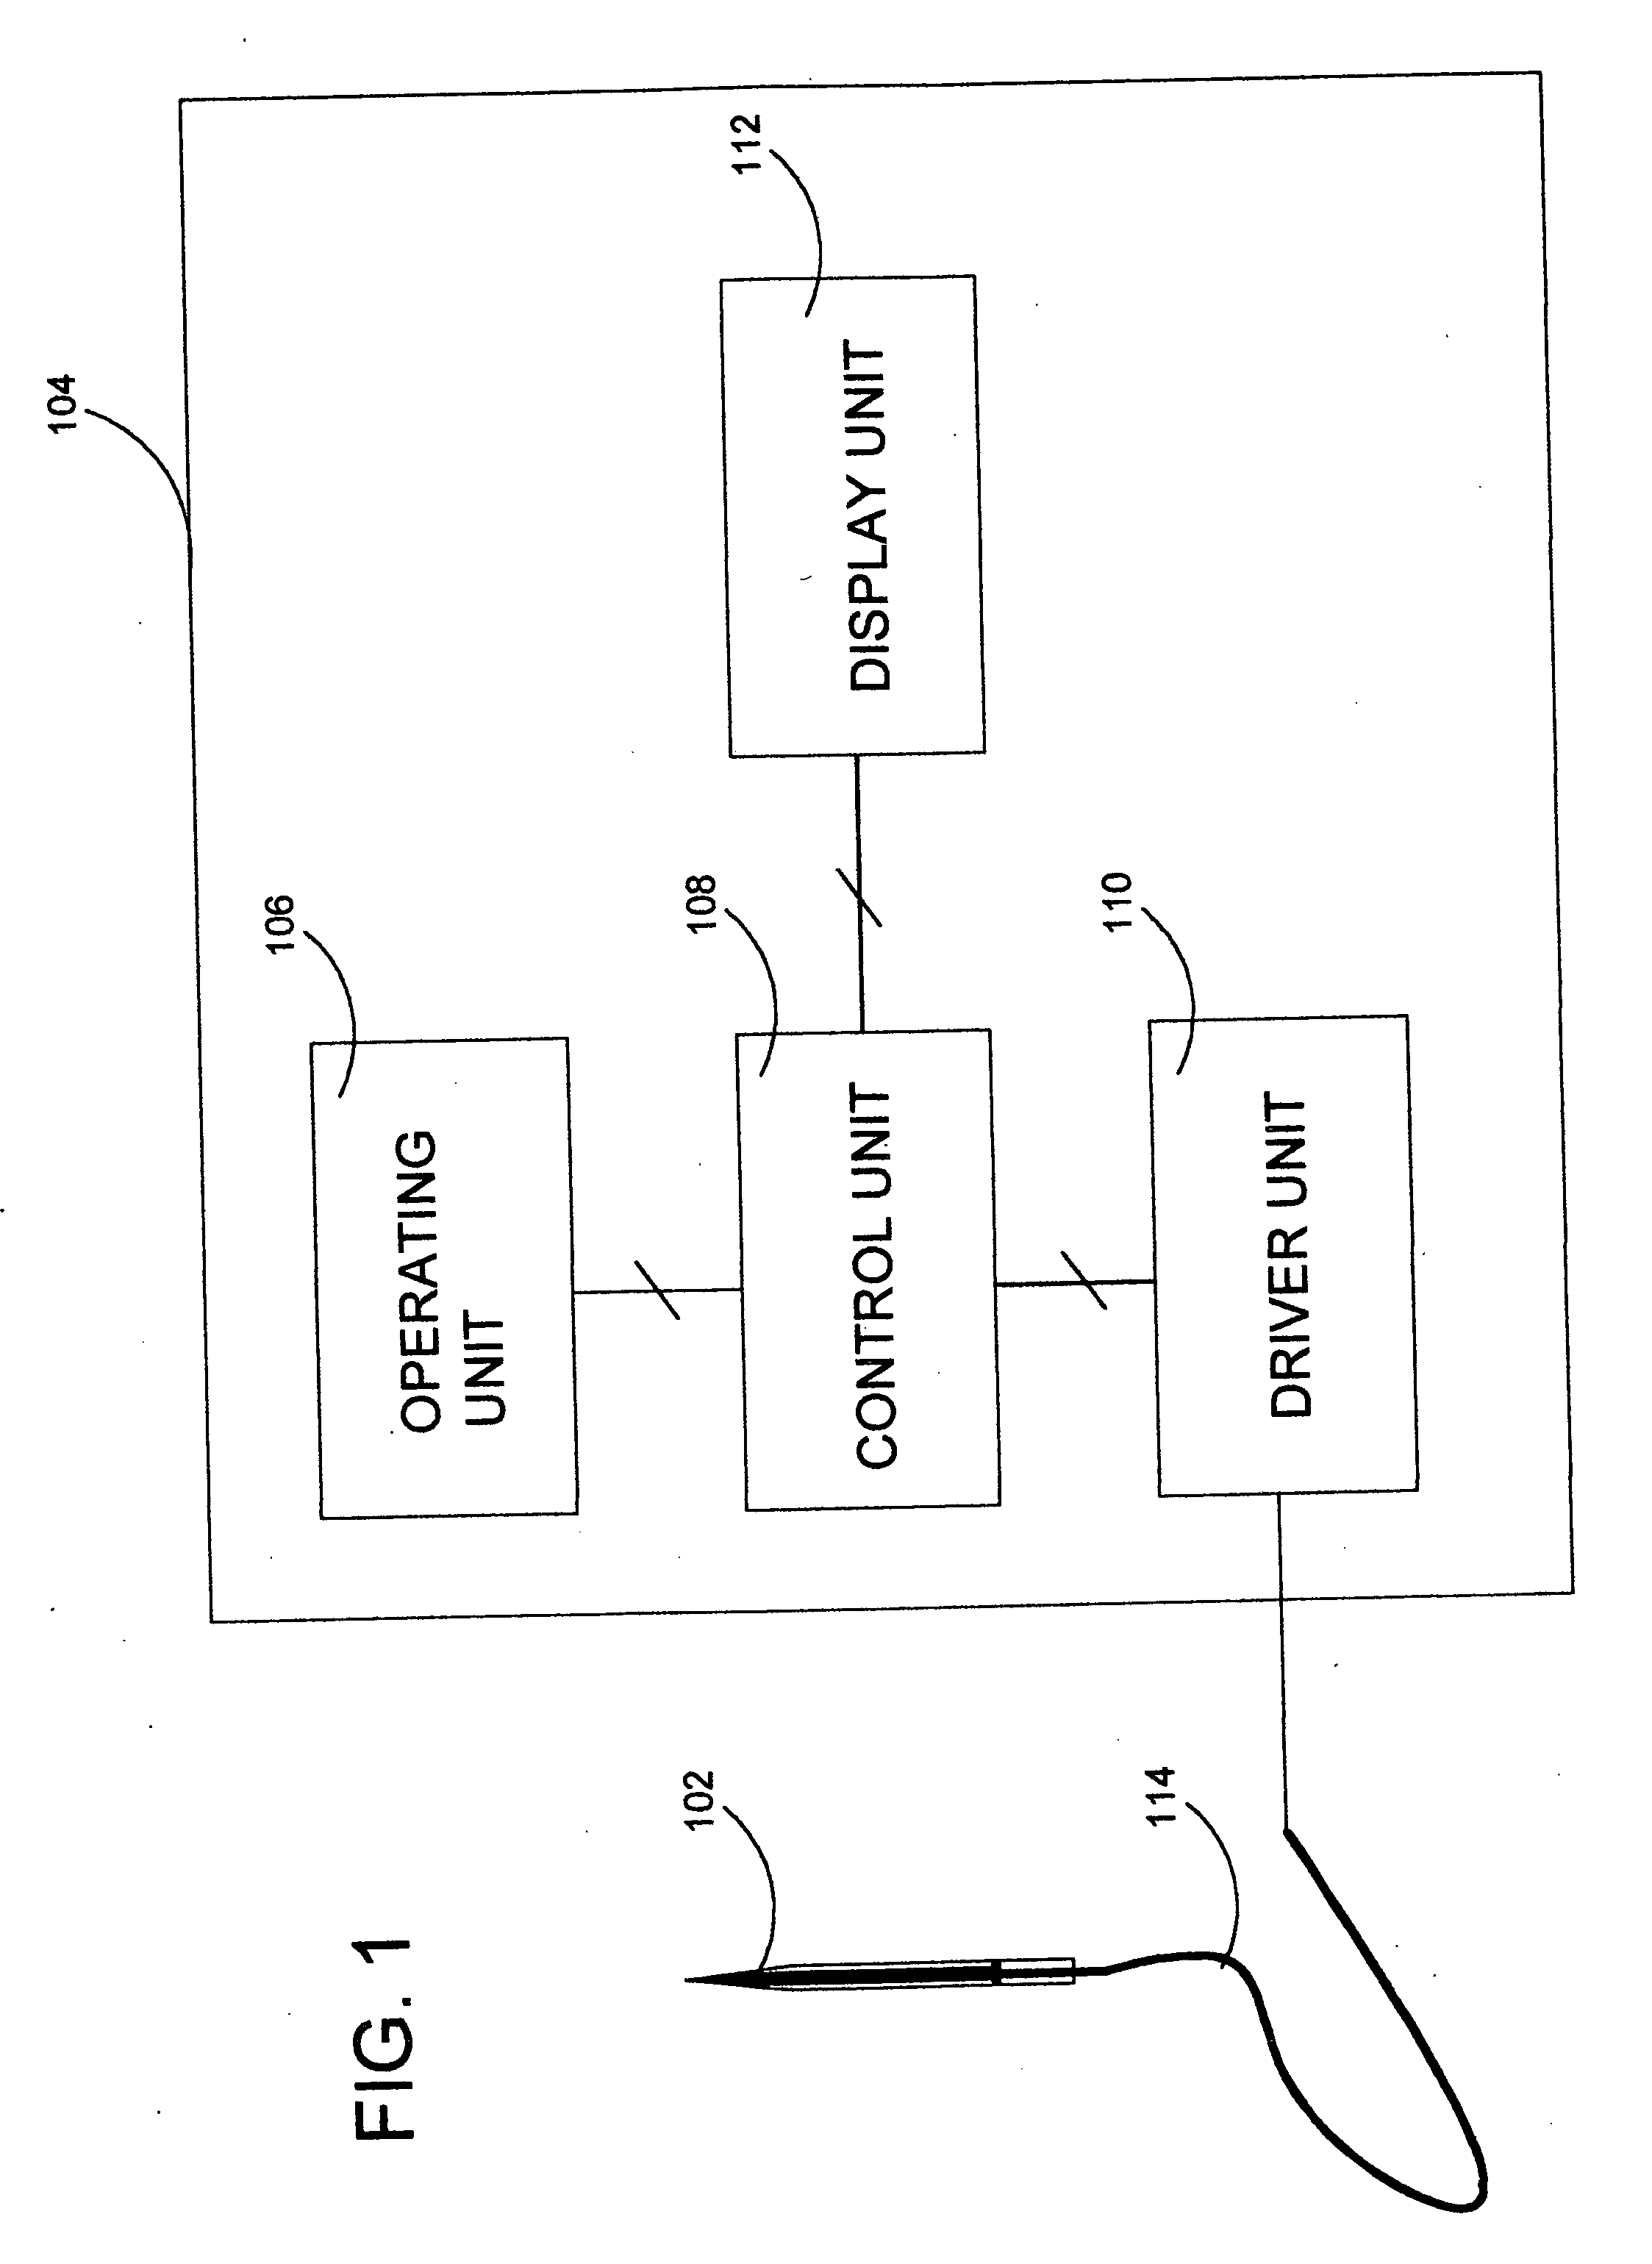 Apparatus for stimulating muscular contraction and relaxation